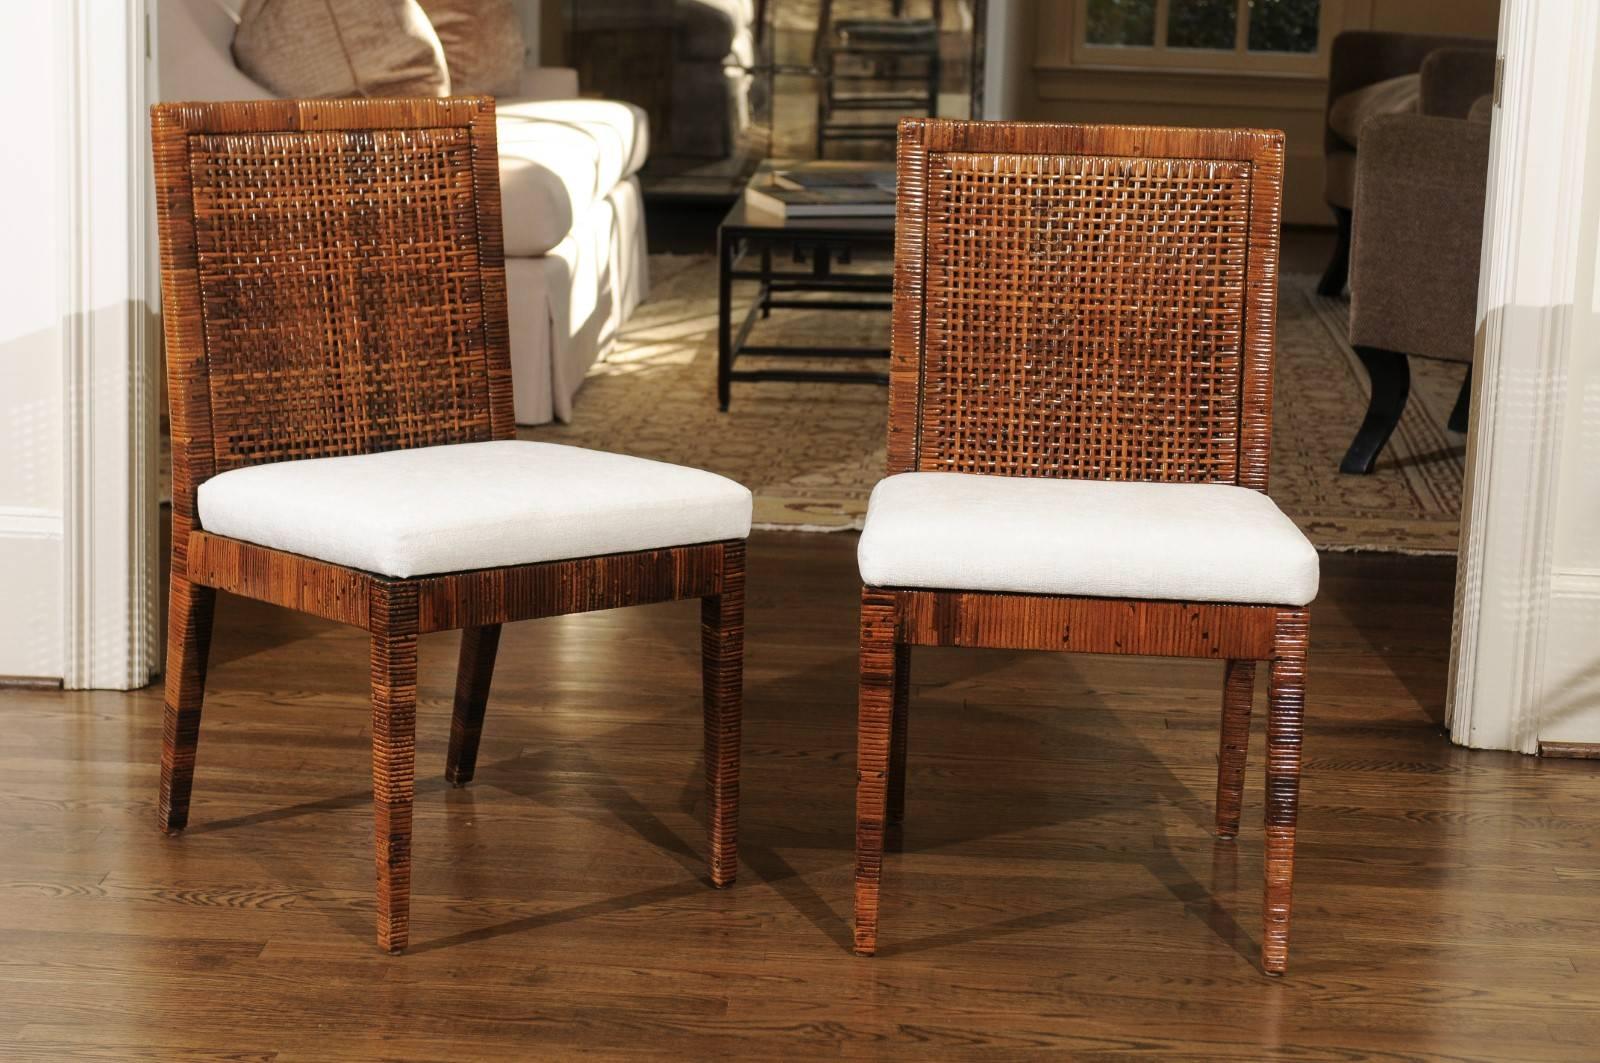 A stunning restored set of eight (8) Billy Baldwin style dining chairs by Bielecky Brothers, circa 1975. Stout hardwood Parsons form painstakingly hand-wrapped in cane with double cane back panels. Rich mellowed Caramel finish with burnished Ebony